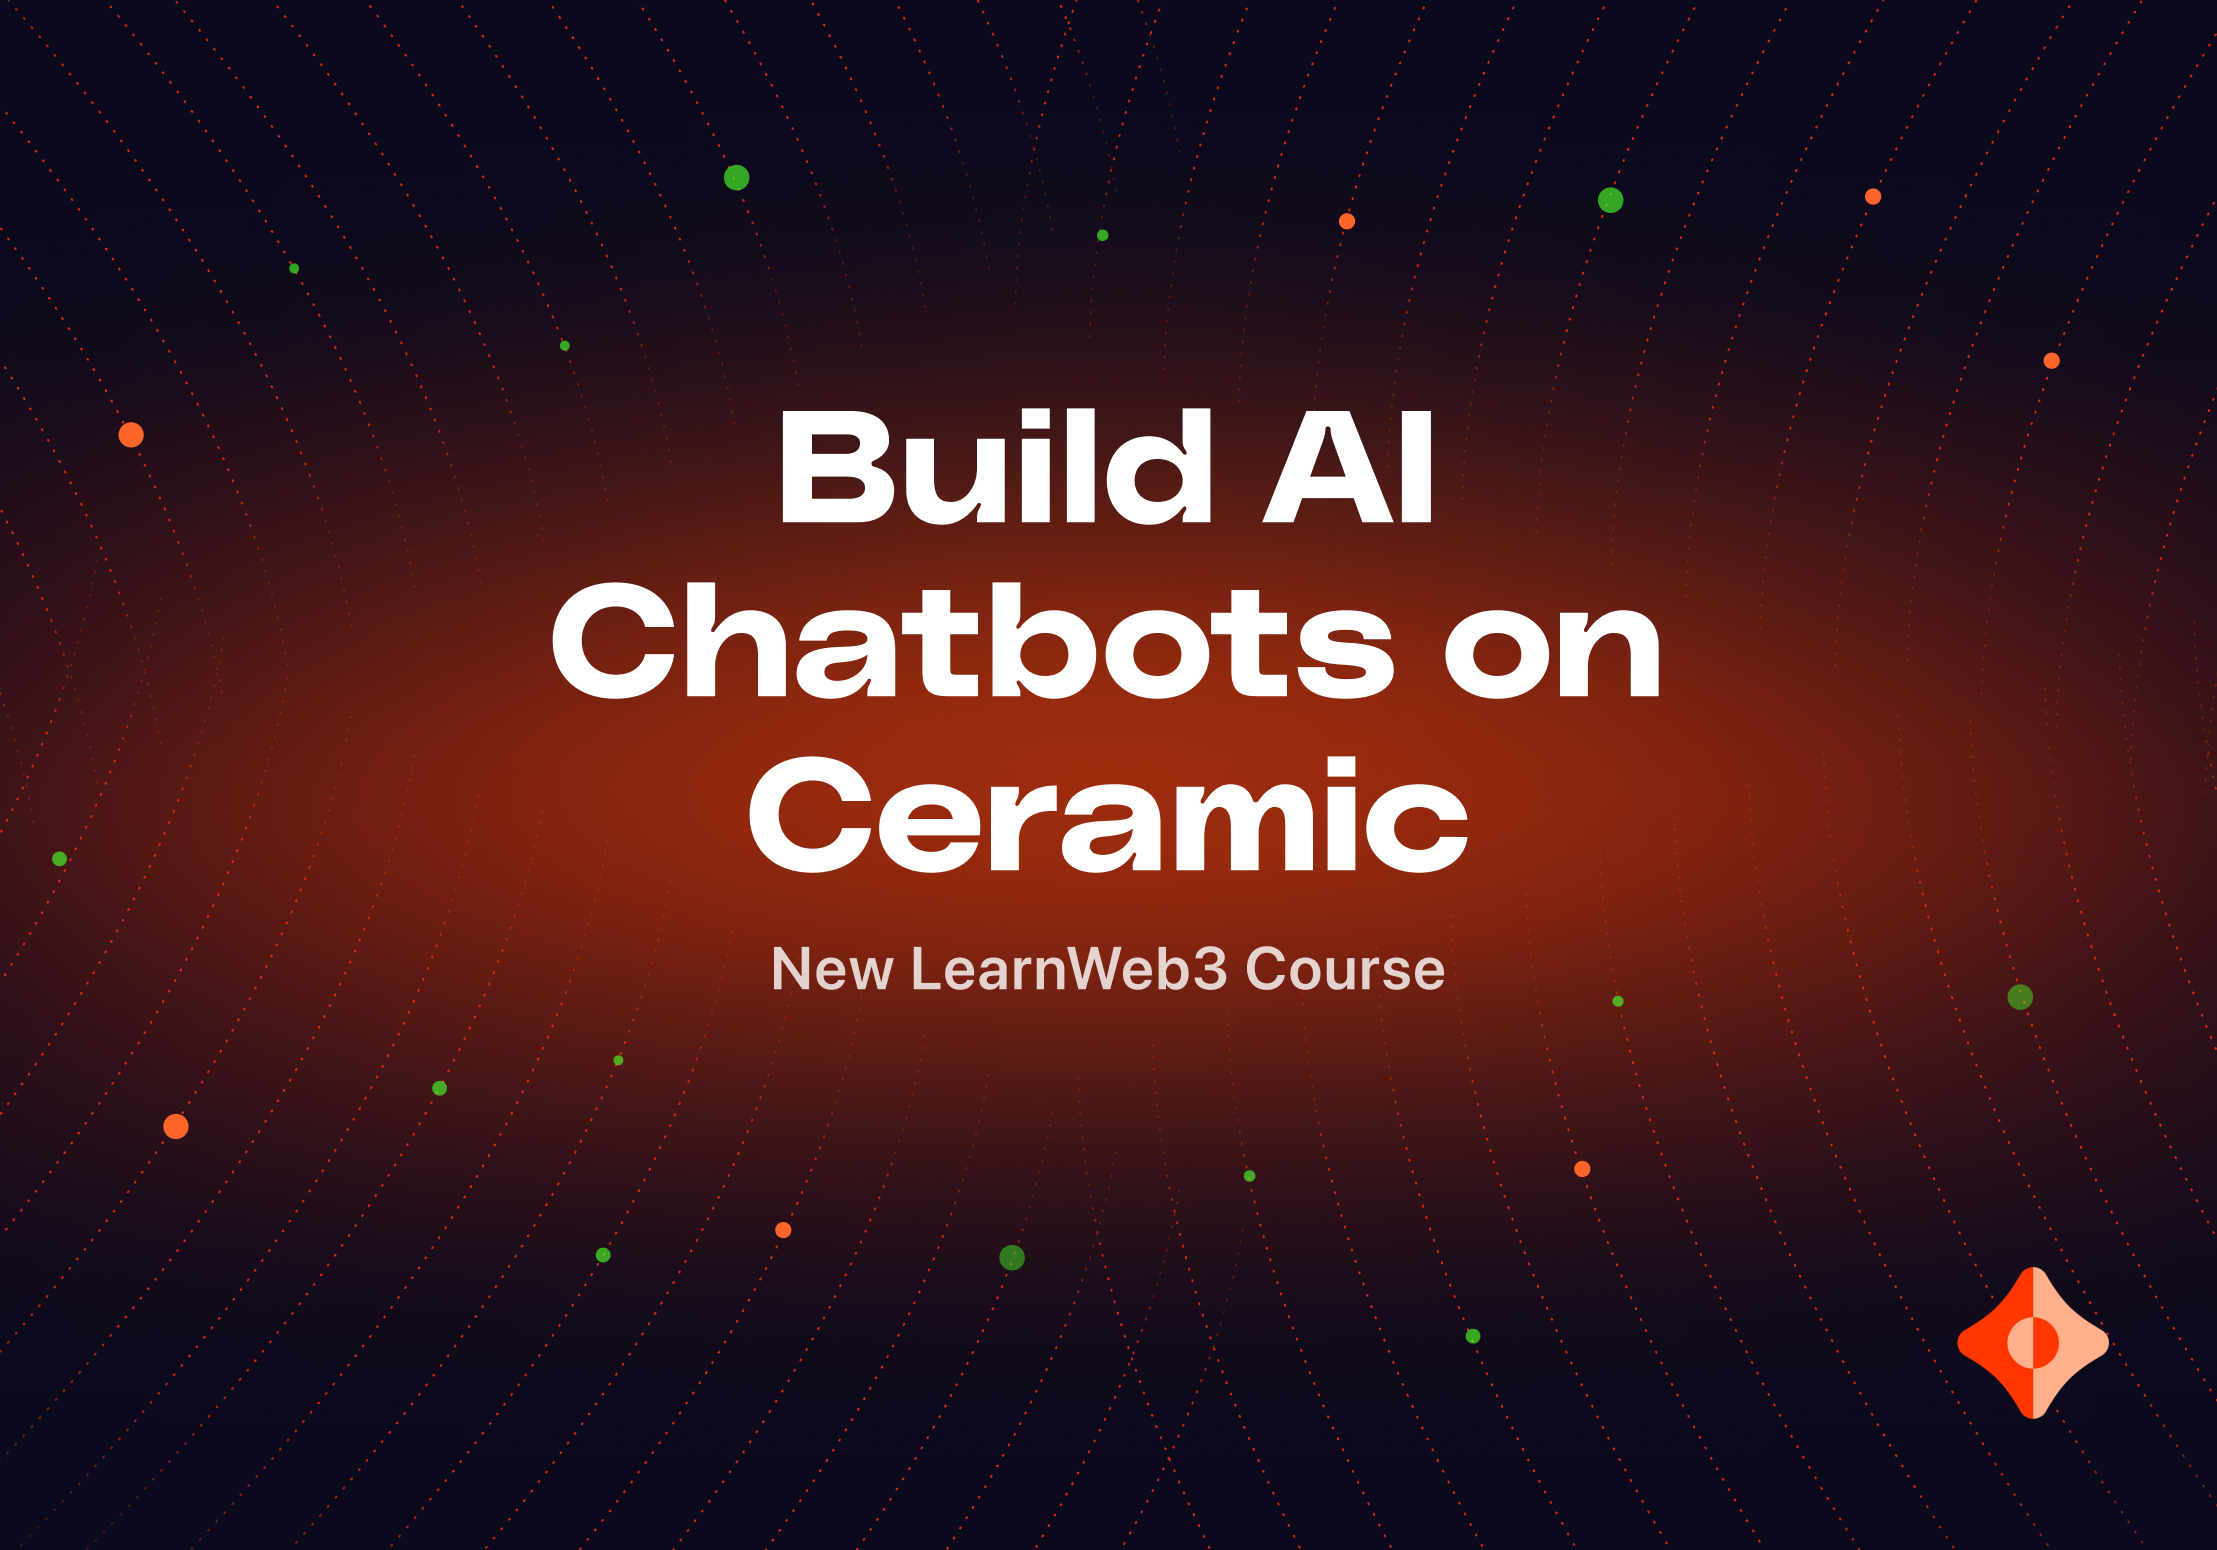 LearnWeb3 Launches New Course: Build AI Chatbots on Ceramic